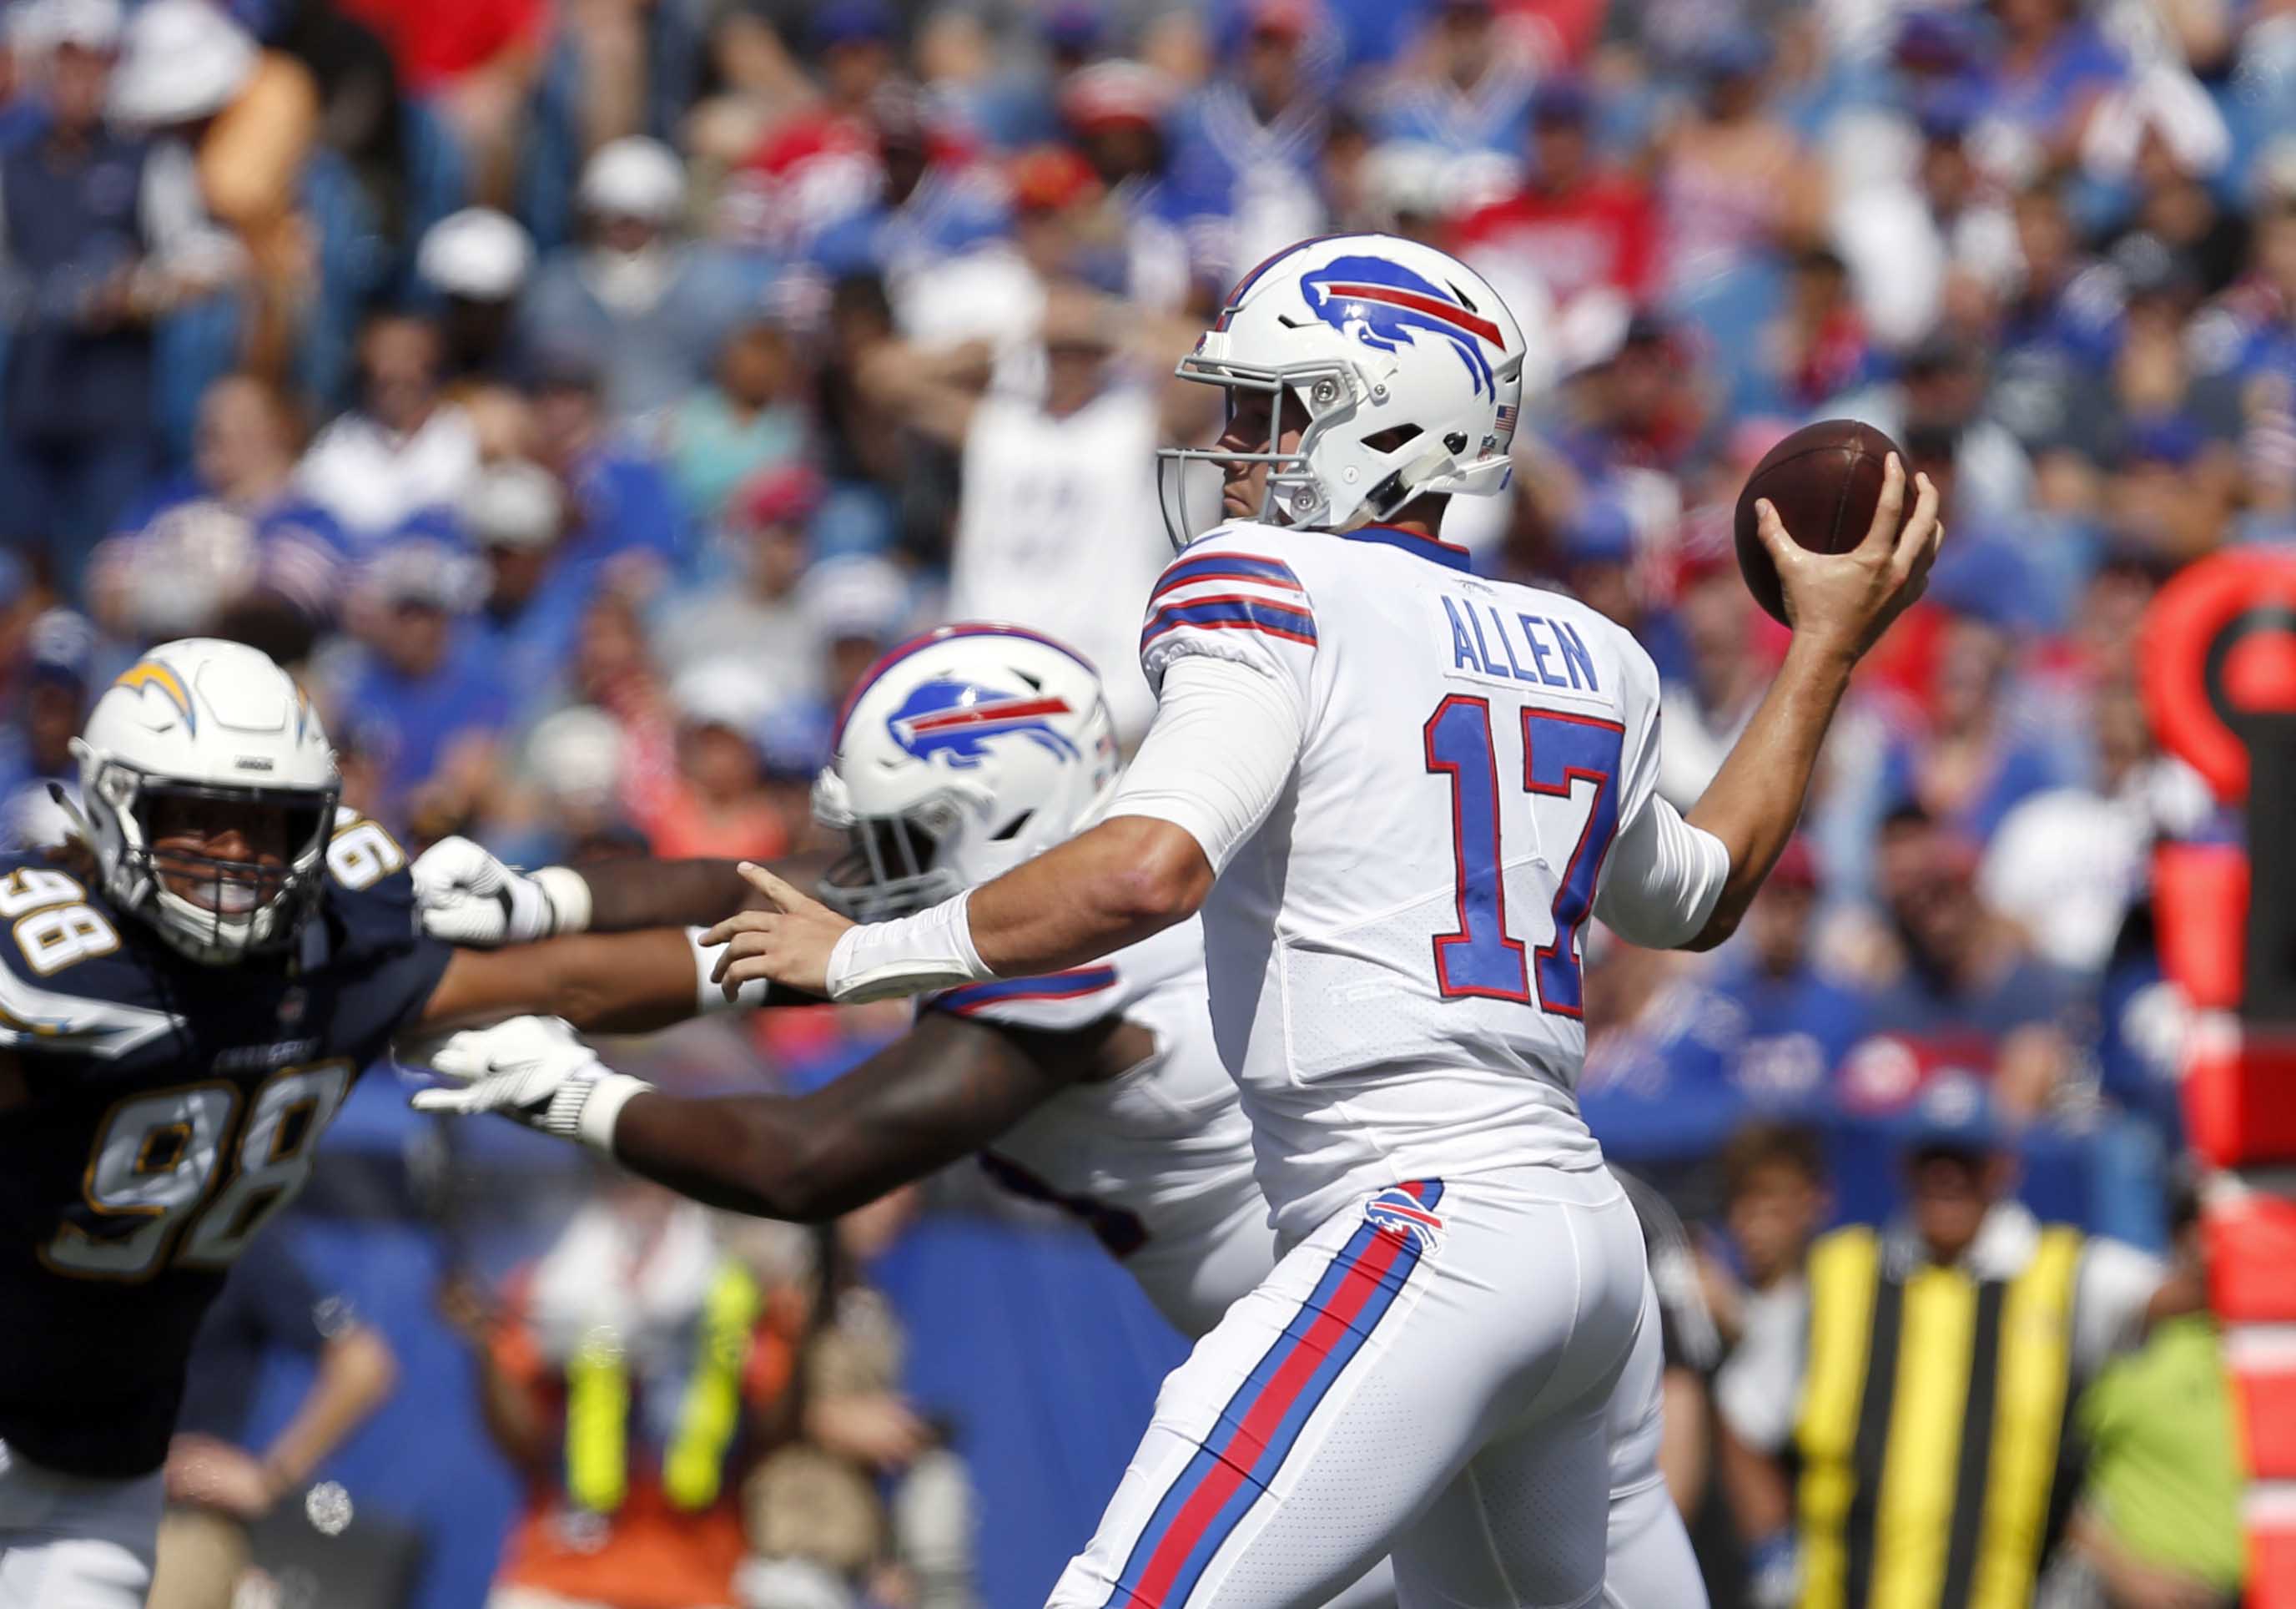 5 takeaways from the Buffalo Bills loss to the Chargers